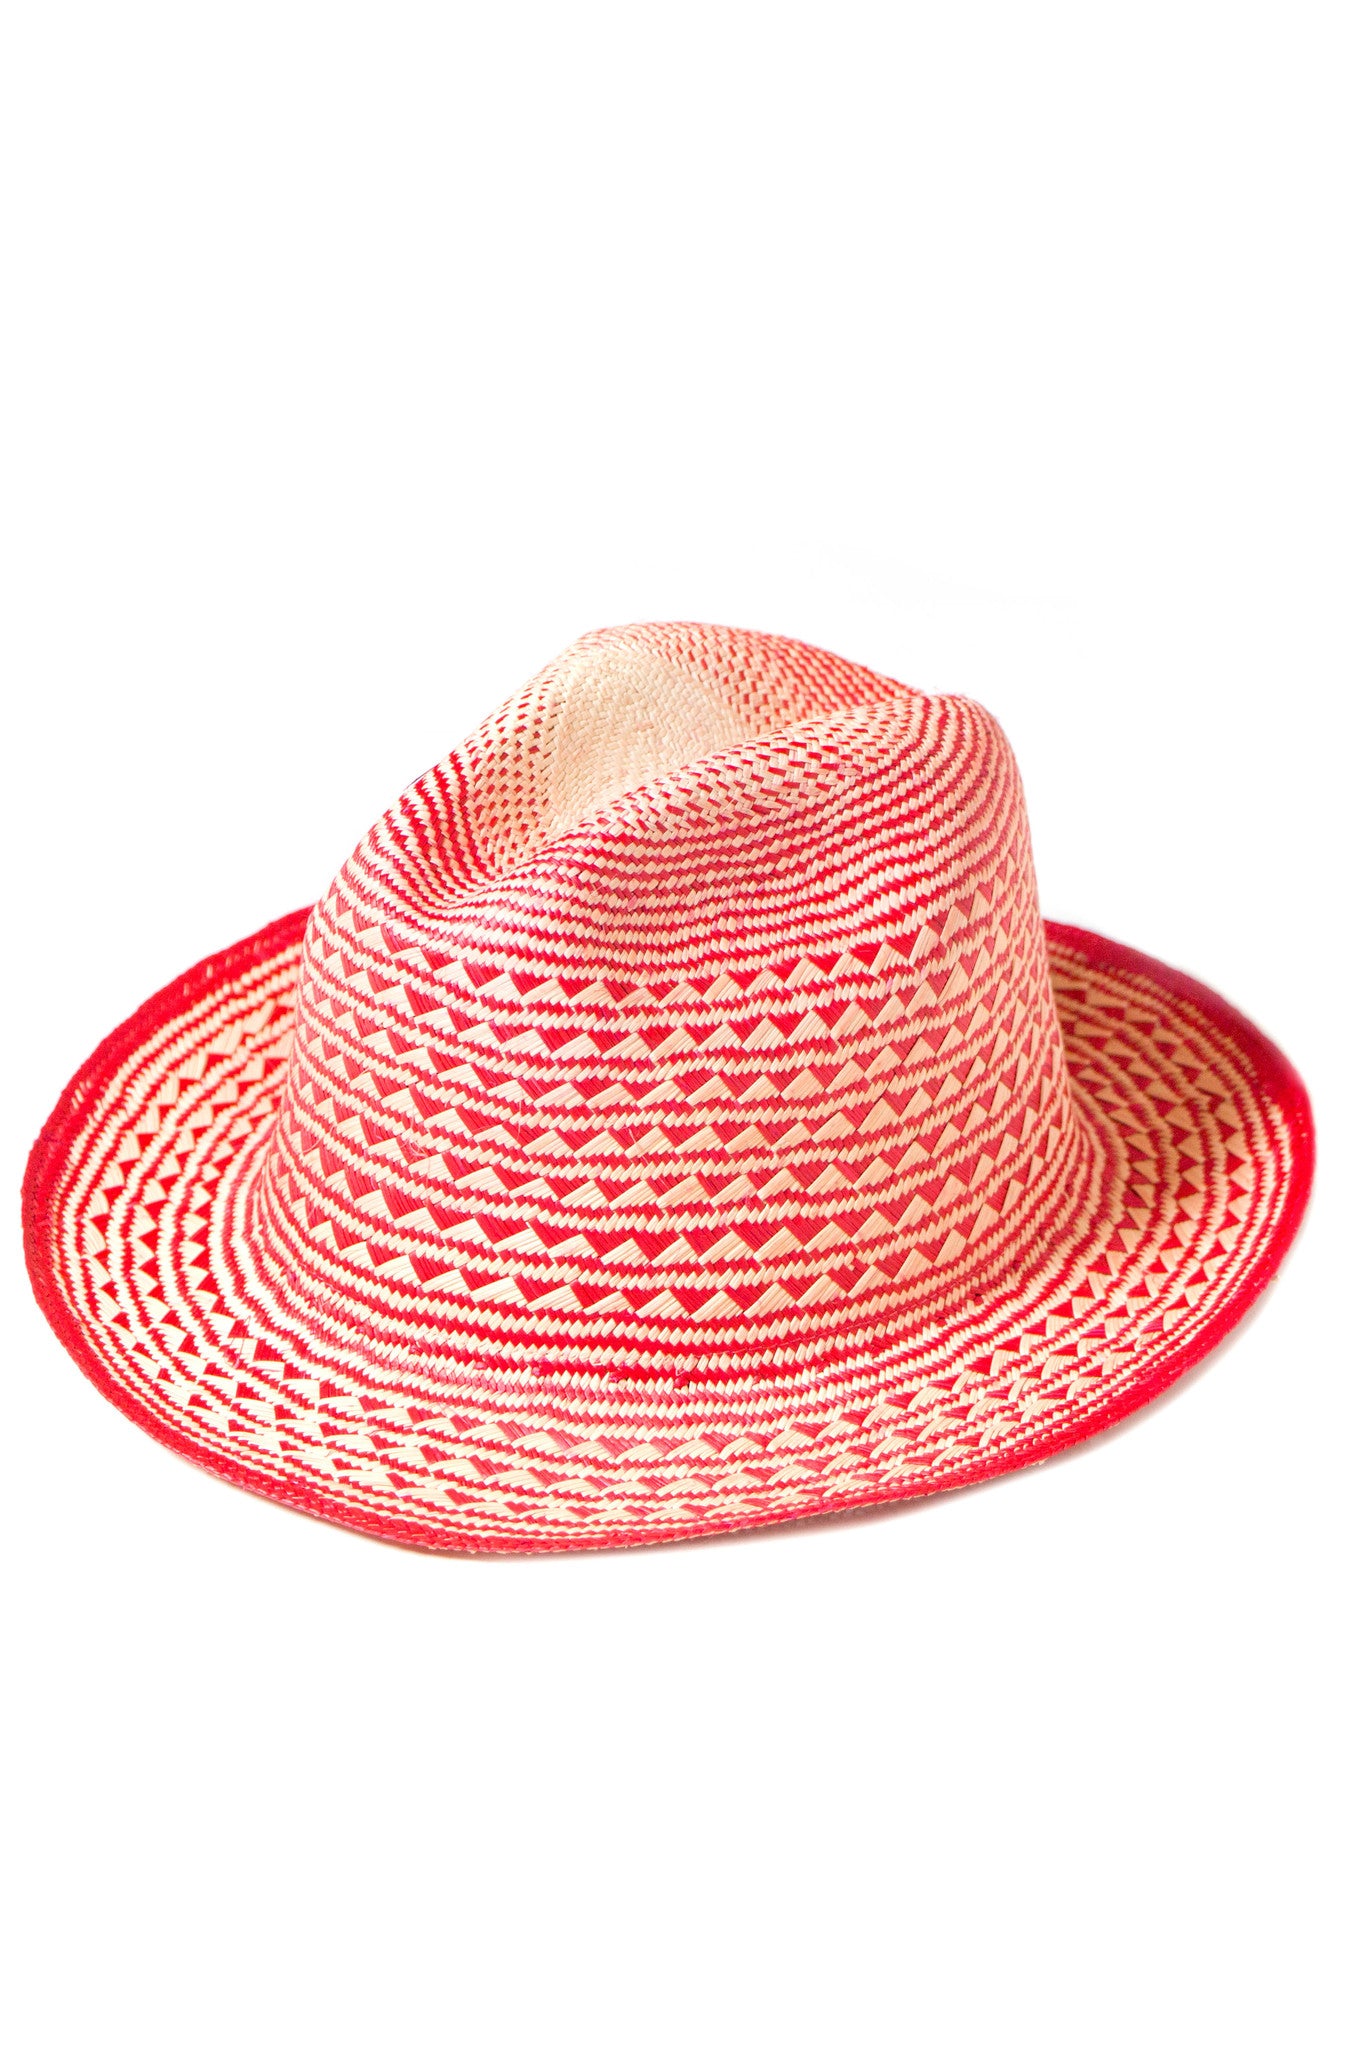 Guanabana Handmade Pyramid Panama Hat. Fedora style hat made from natural straw featuring a red woven pyramid pattern. Interior elastic band around the brim to ensure a snug fit. Handcrafted by artisans in Colombia. 2 inch brim. 5 inch crown. Color red natural. One size fits most.